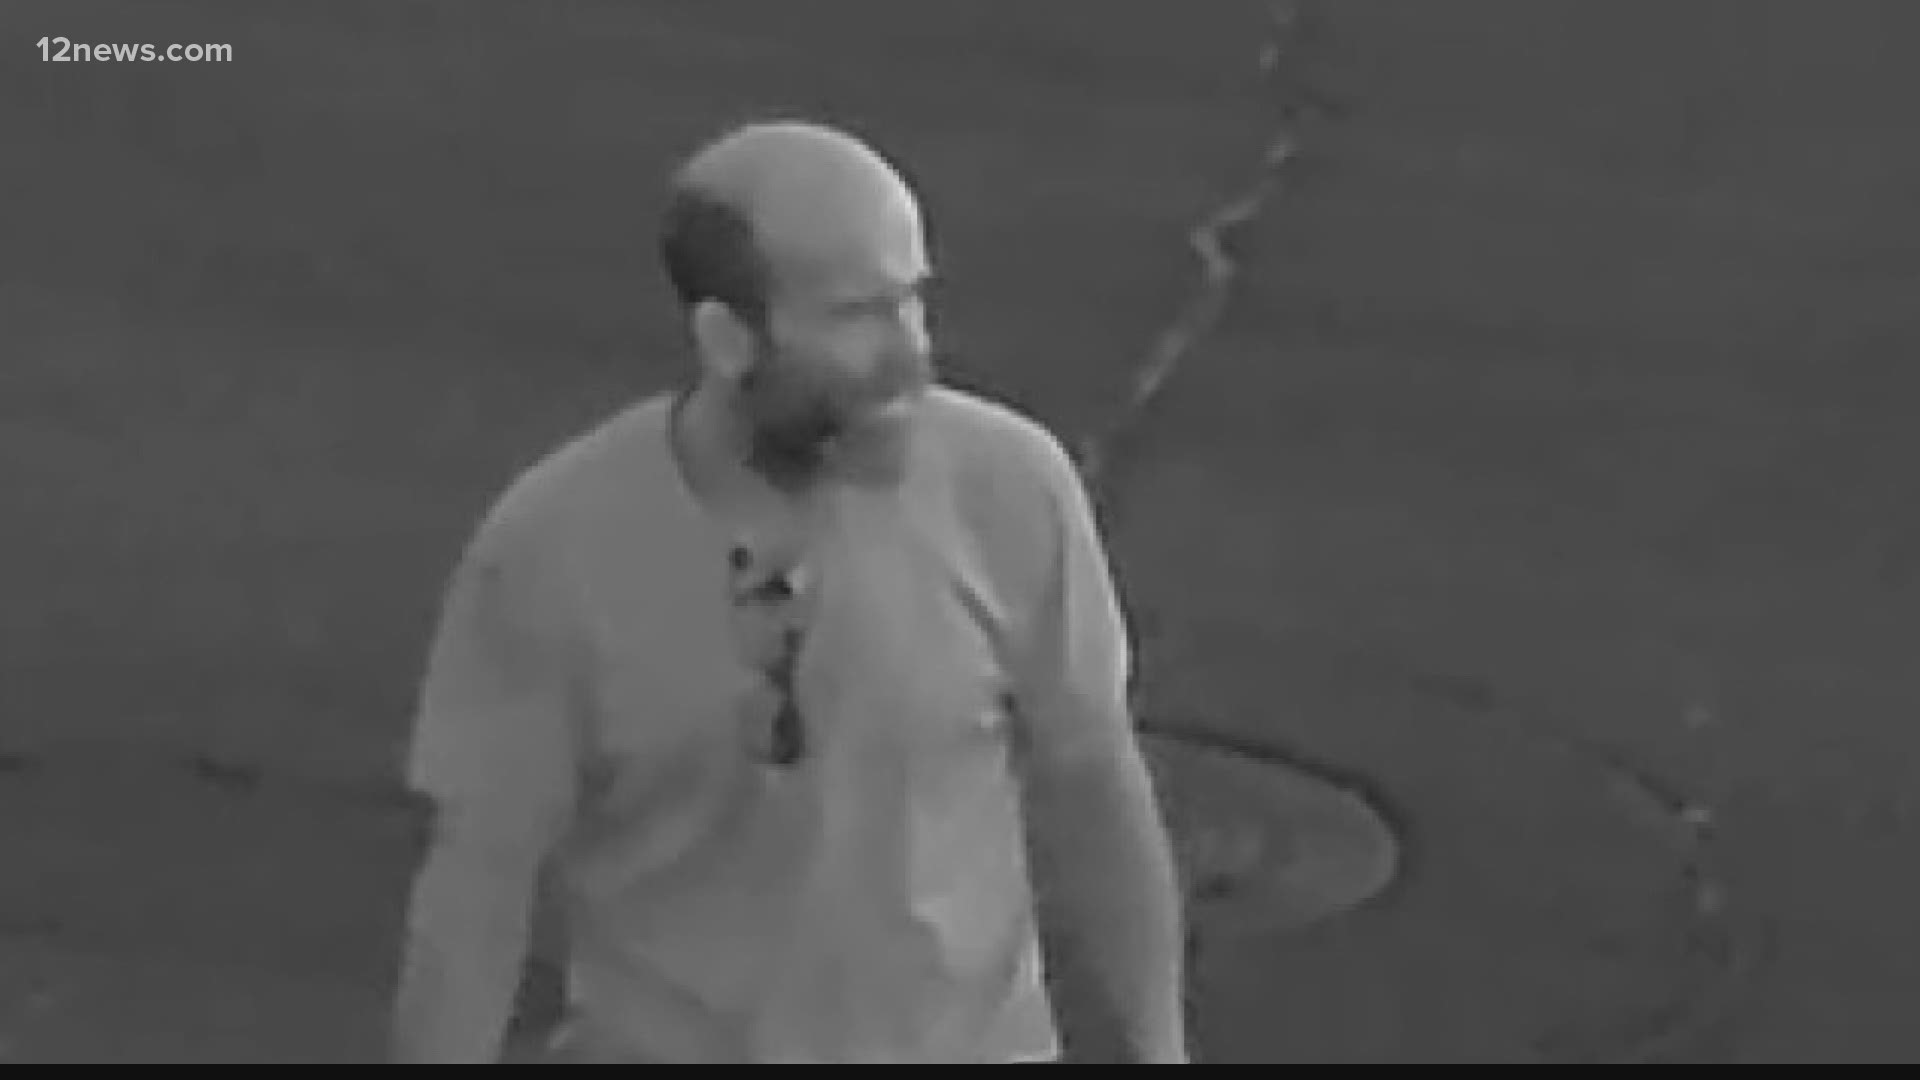 A Chandler man's security camera system caught a thief walking into his partially opened garage and taking thousands of dollars worth of equipment.